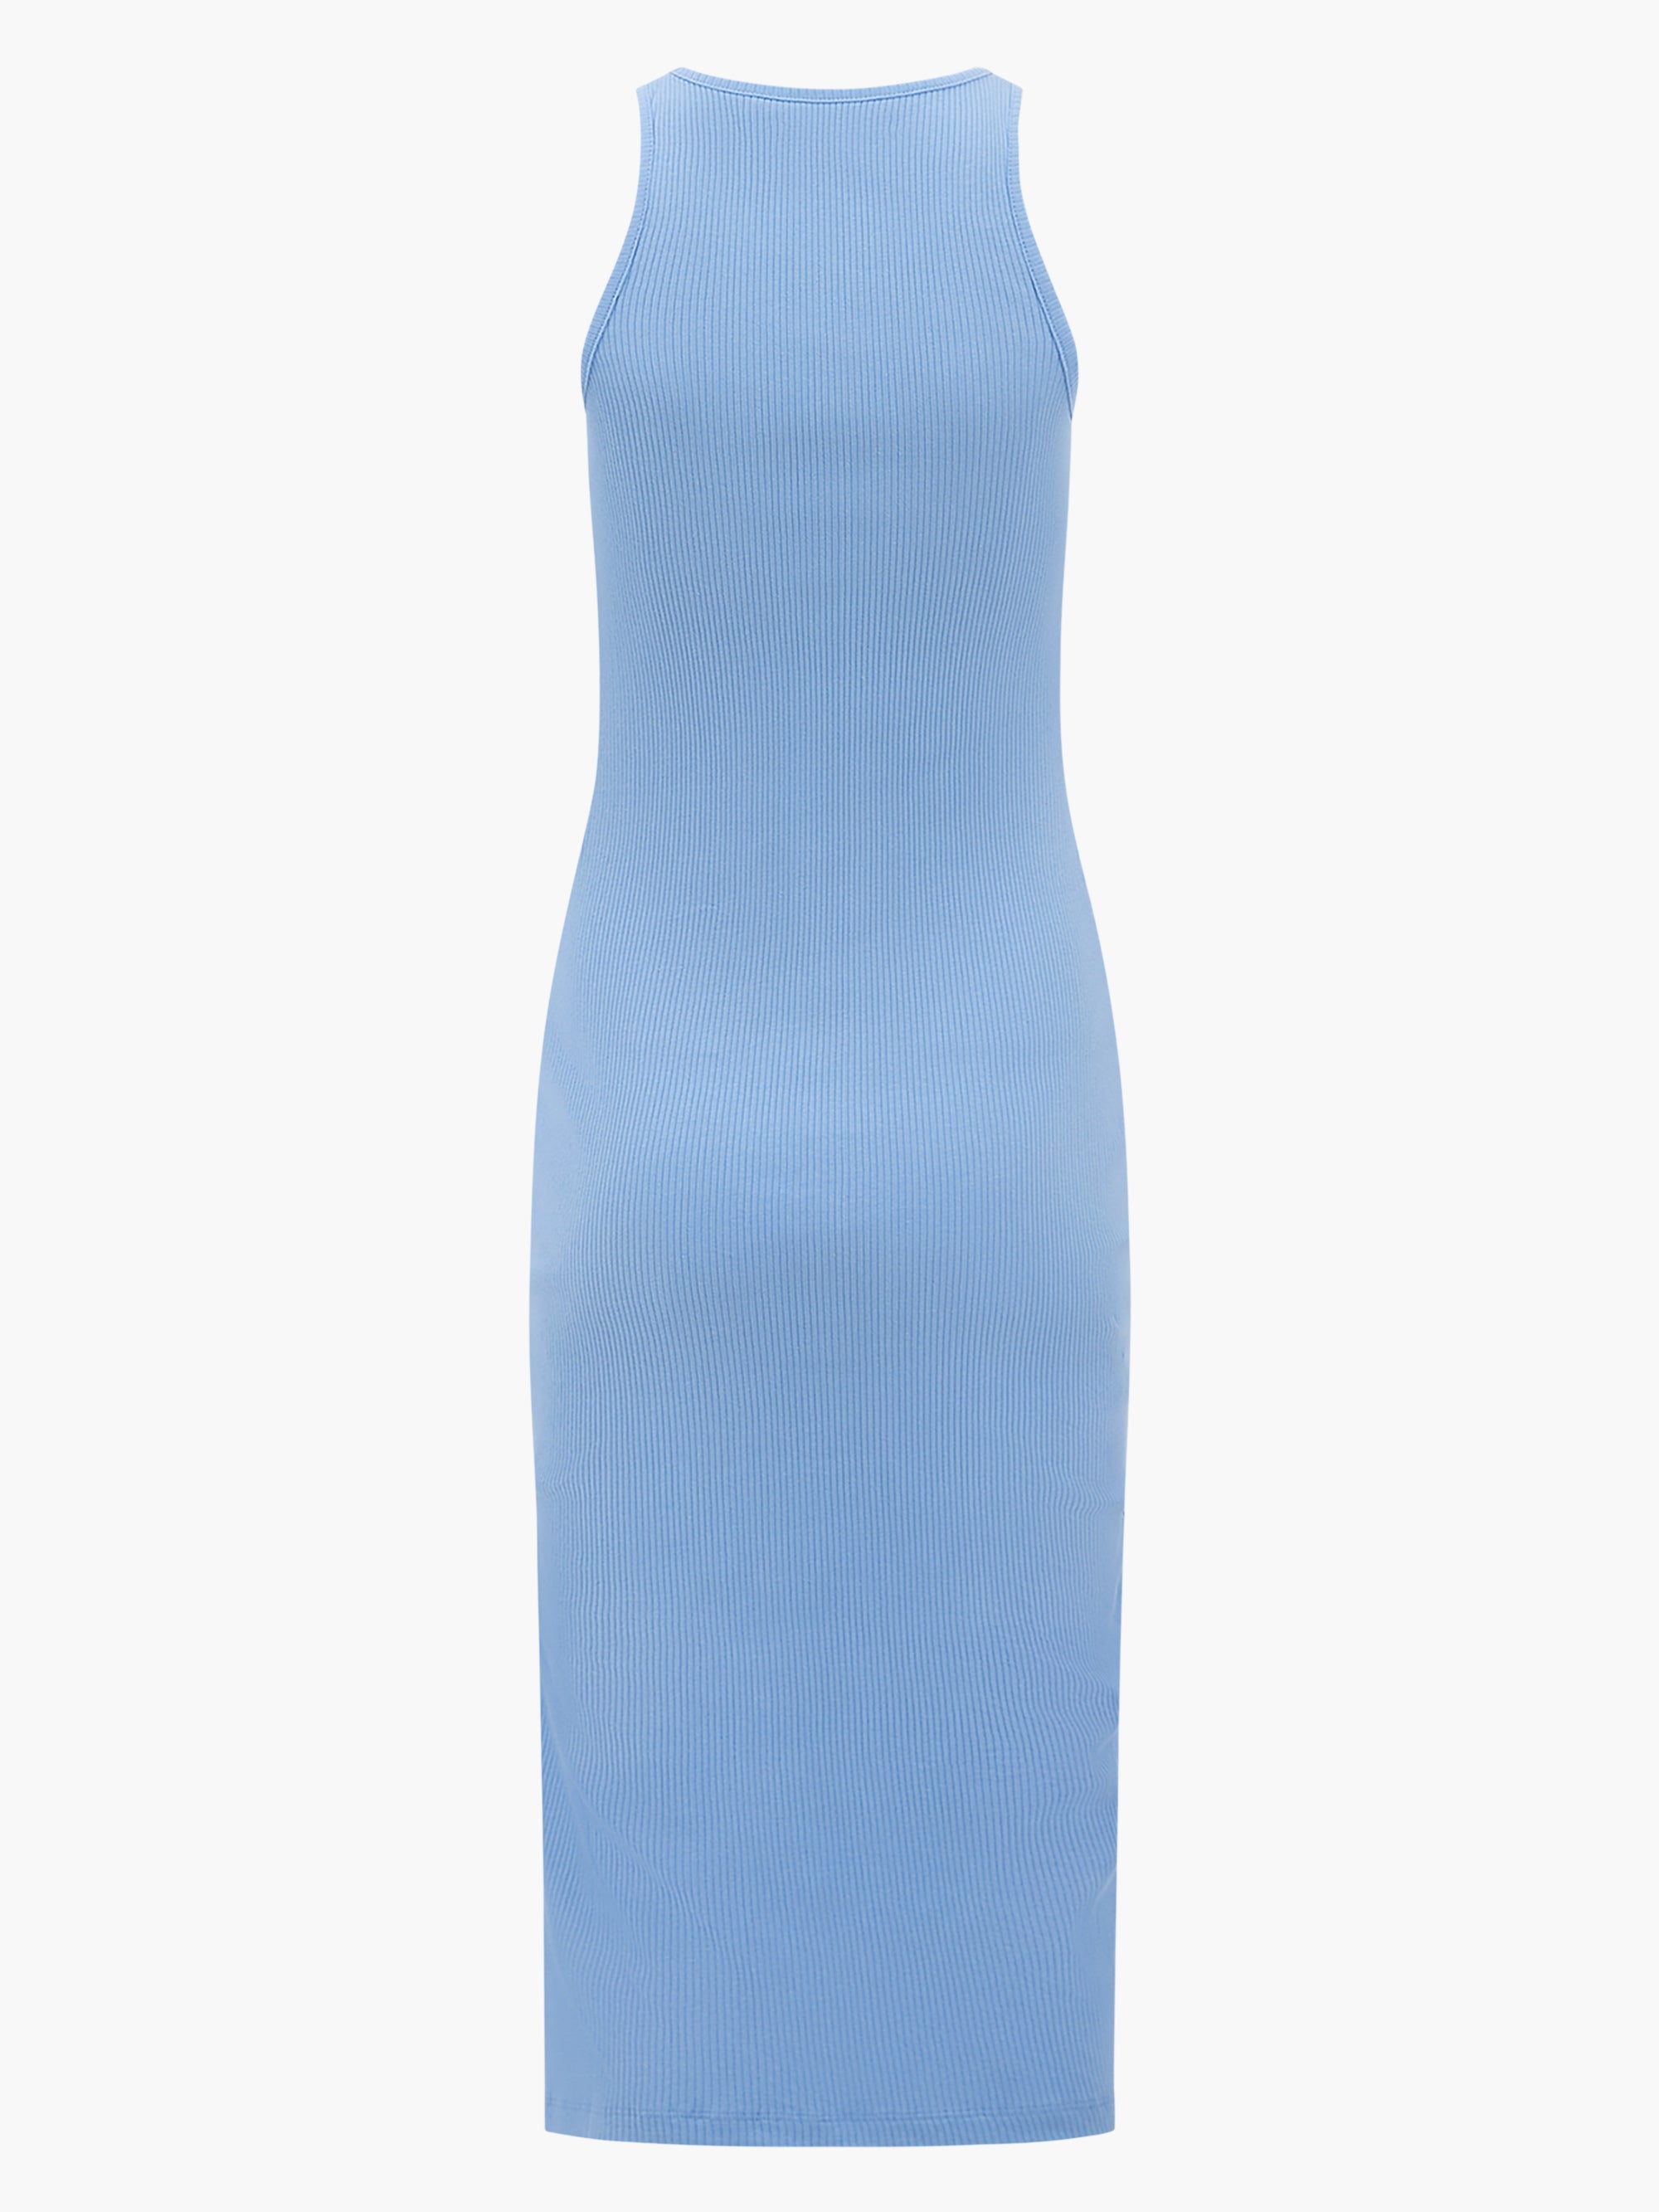 Racer Ribbed Dress CORNFLOWER | French Connection UK